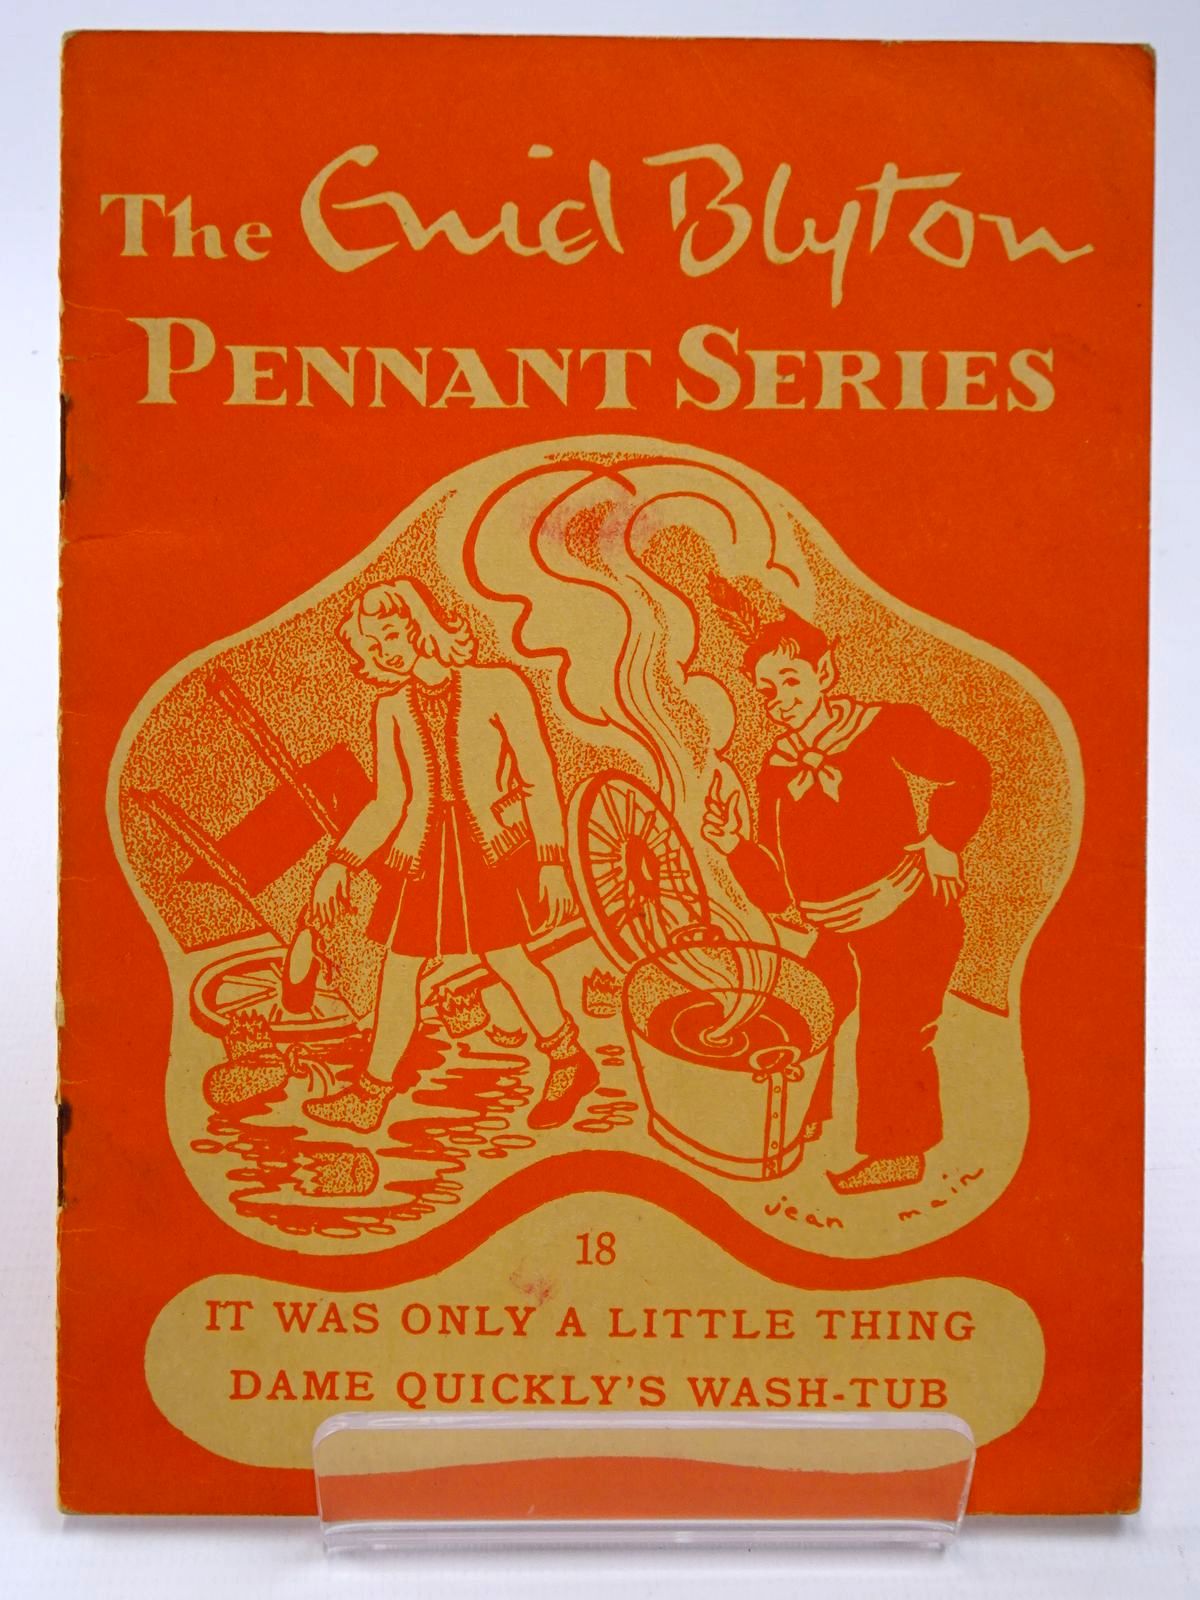 Photo of THE ENID BLYTON PENNANT SERIES No. 18 IT WAS ONLY A LITTLE THING / DAME QUICKLY'S WASH-TUB written by Blyton, Enid illustrated by Soper, Eileen
Main, Jean published by Macmillan & Co. Ltd. (STOCK CODE: 2130527)  for sale by Stella & Rose's Books